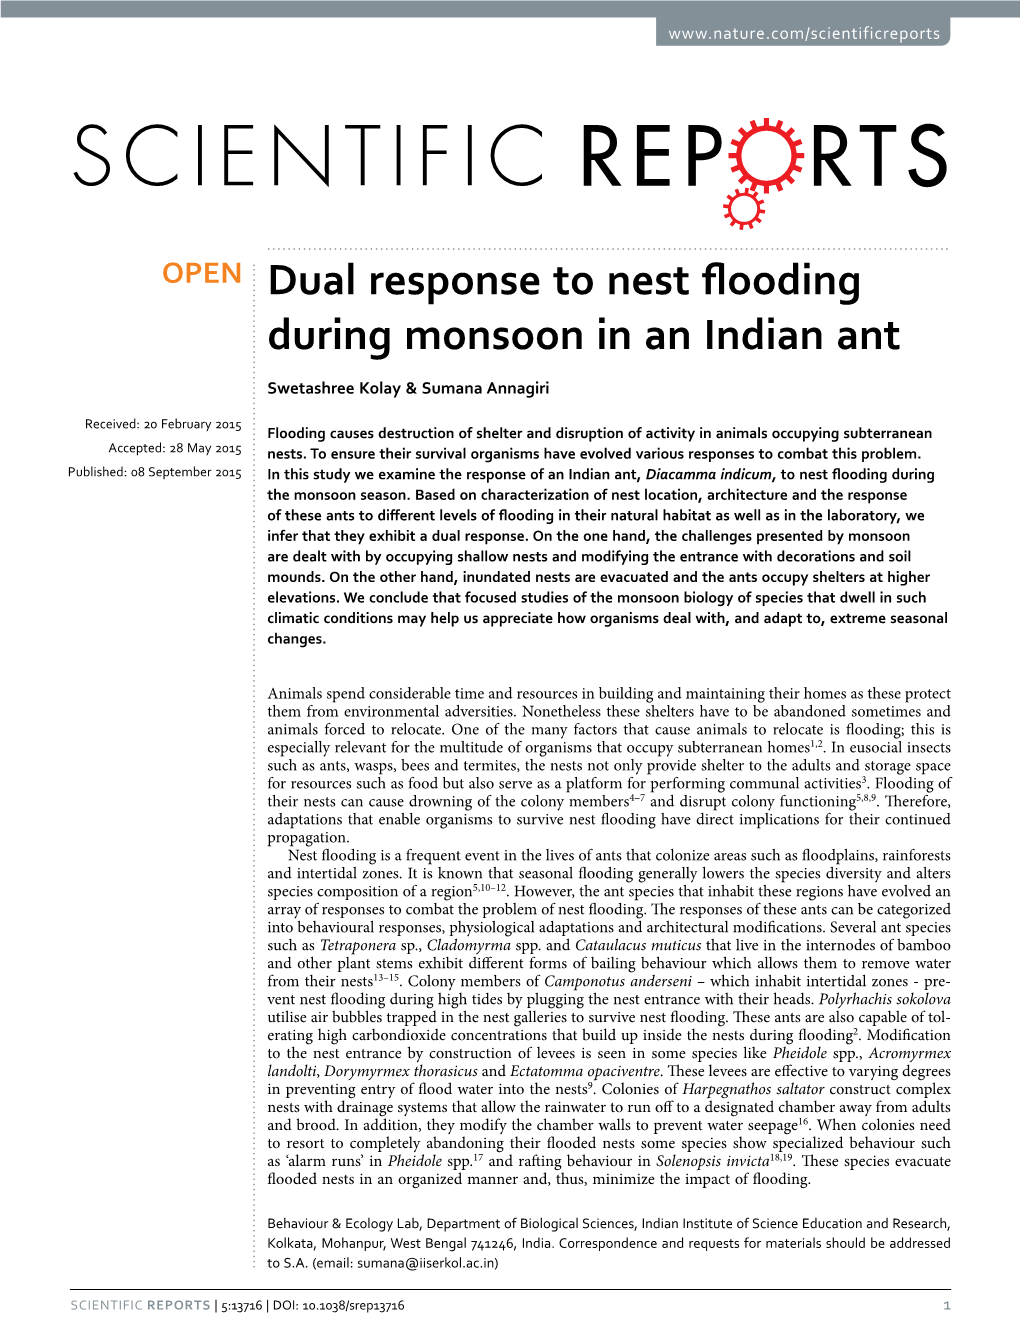 Dual Response to Nest Flooding During Monsoon in an Indian Ant